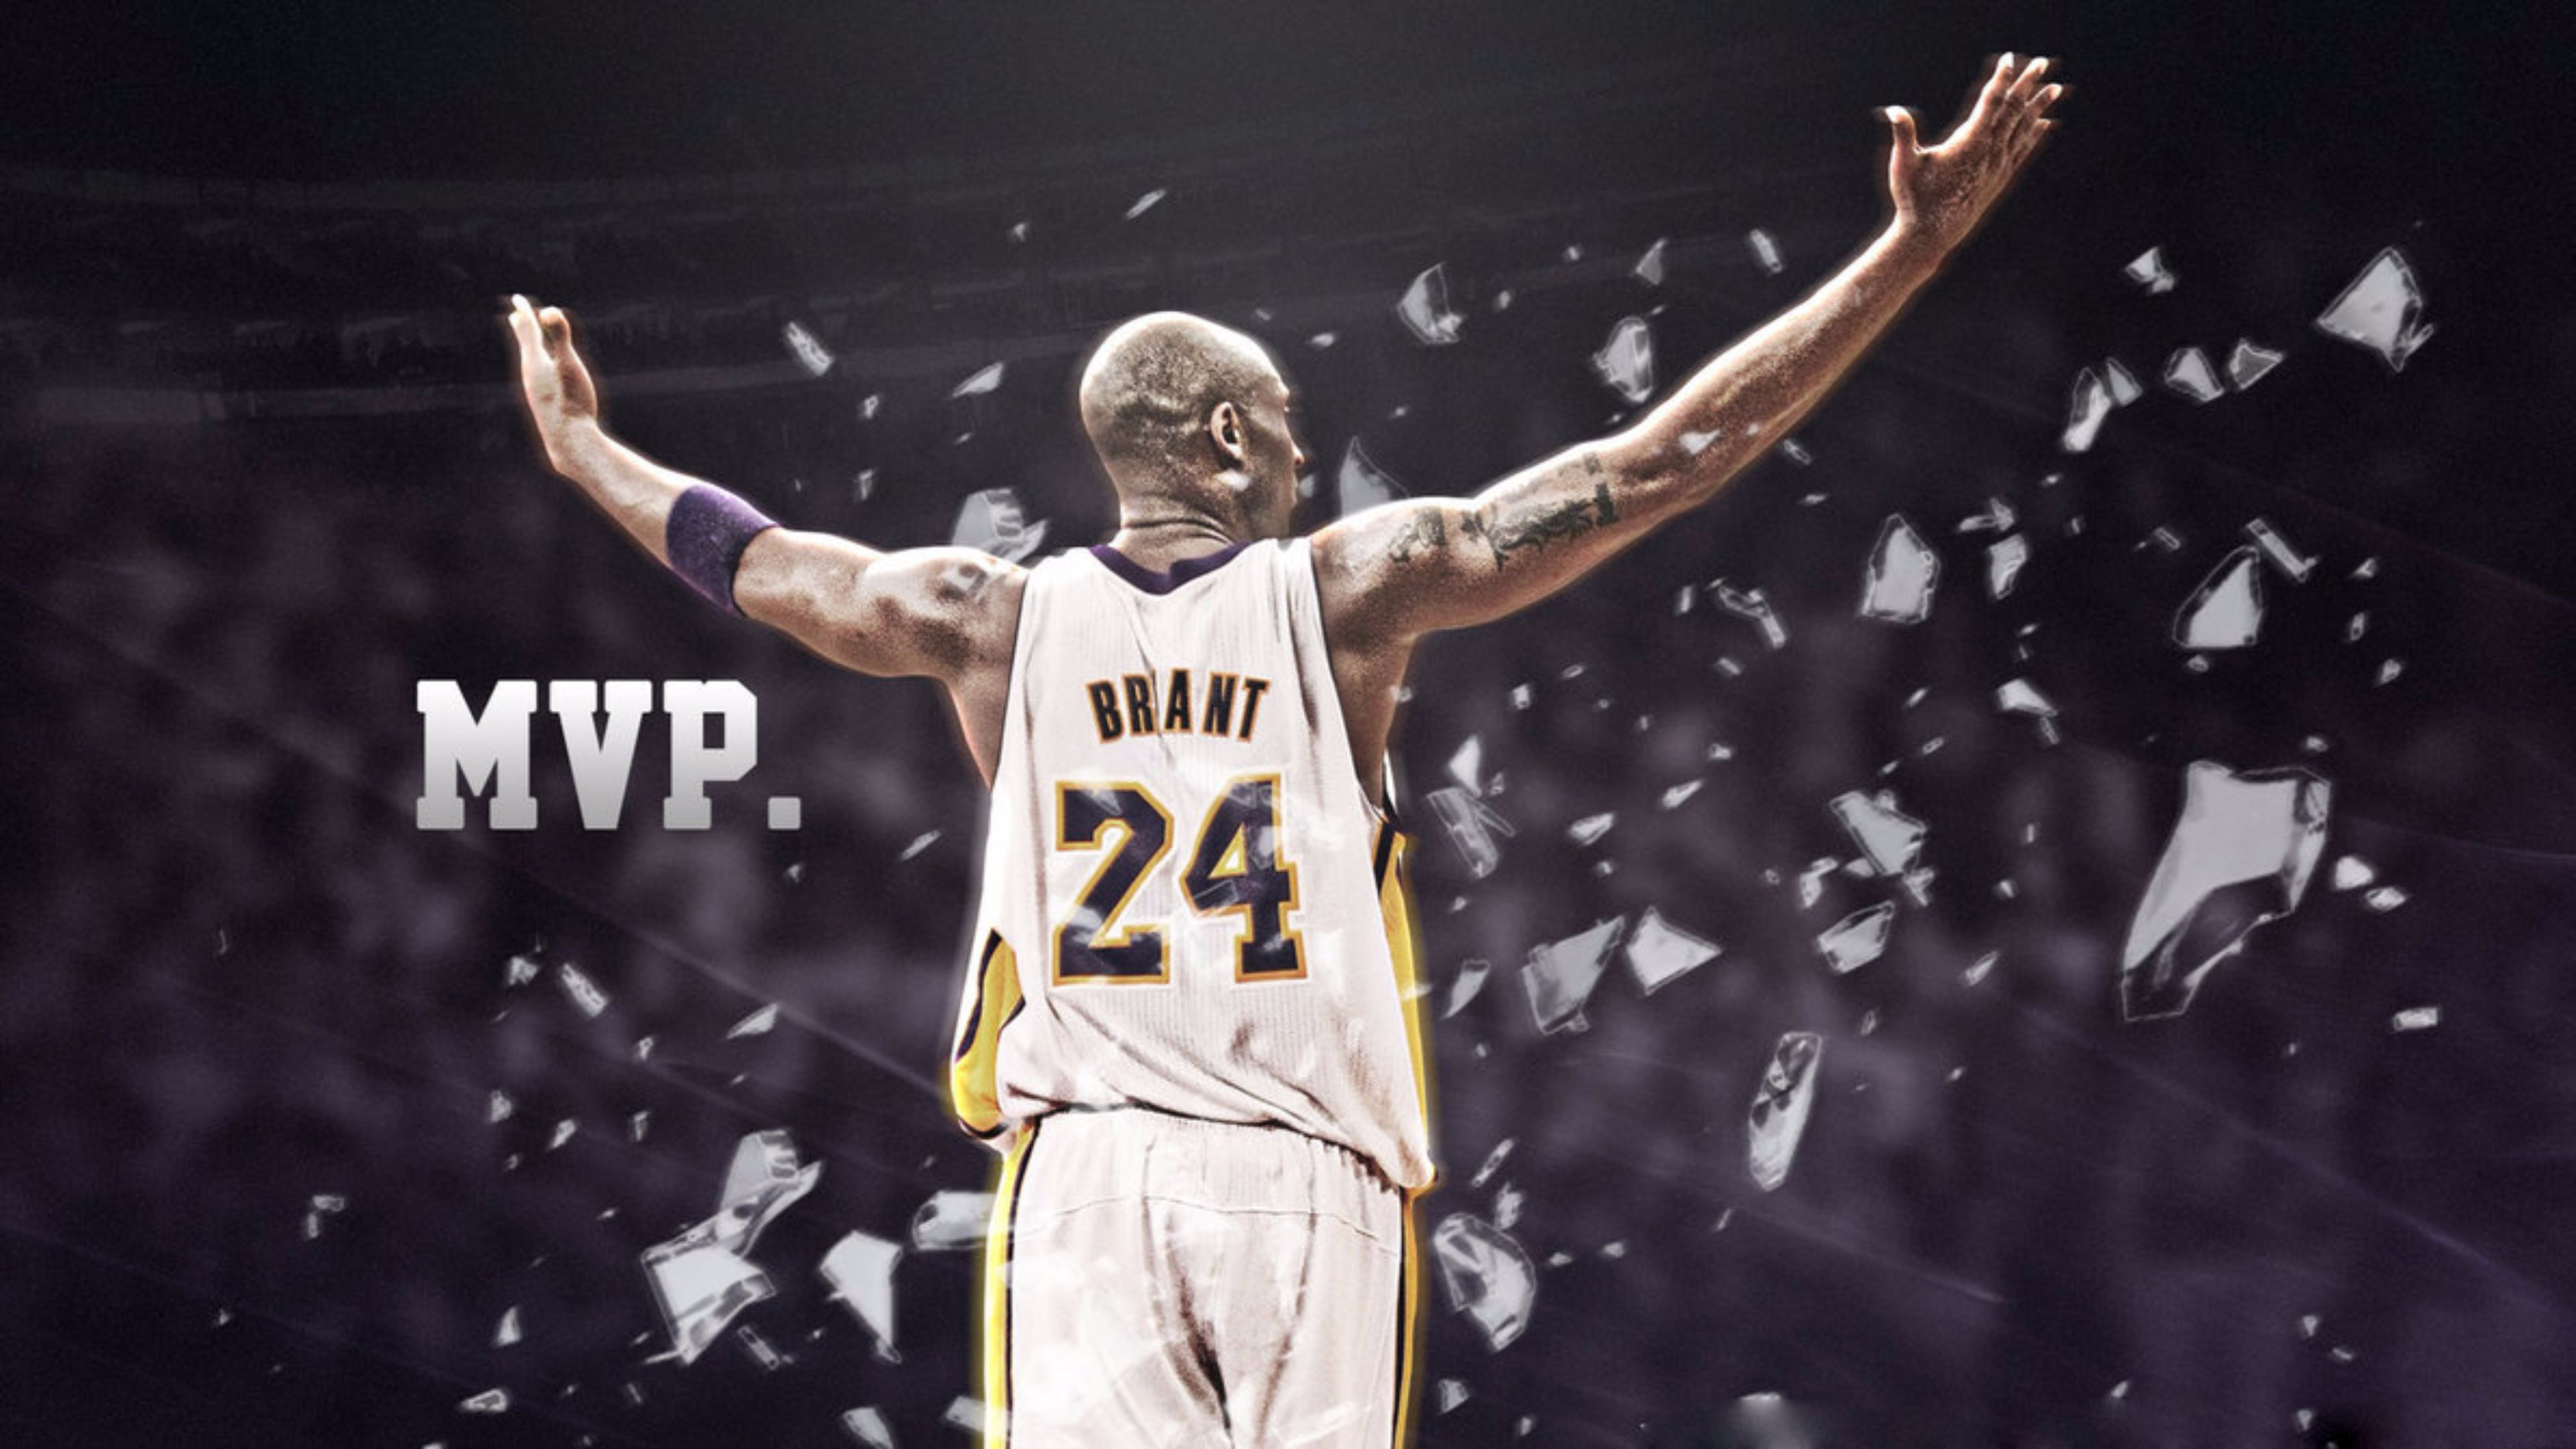 Kobe Bryant Wallpapers High Resolution and Quality DownloadKobe Bryant